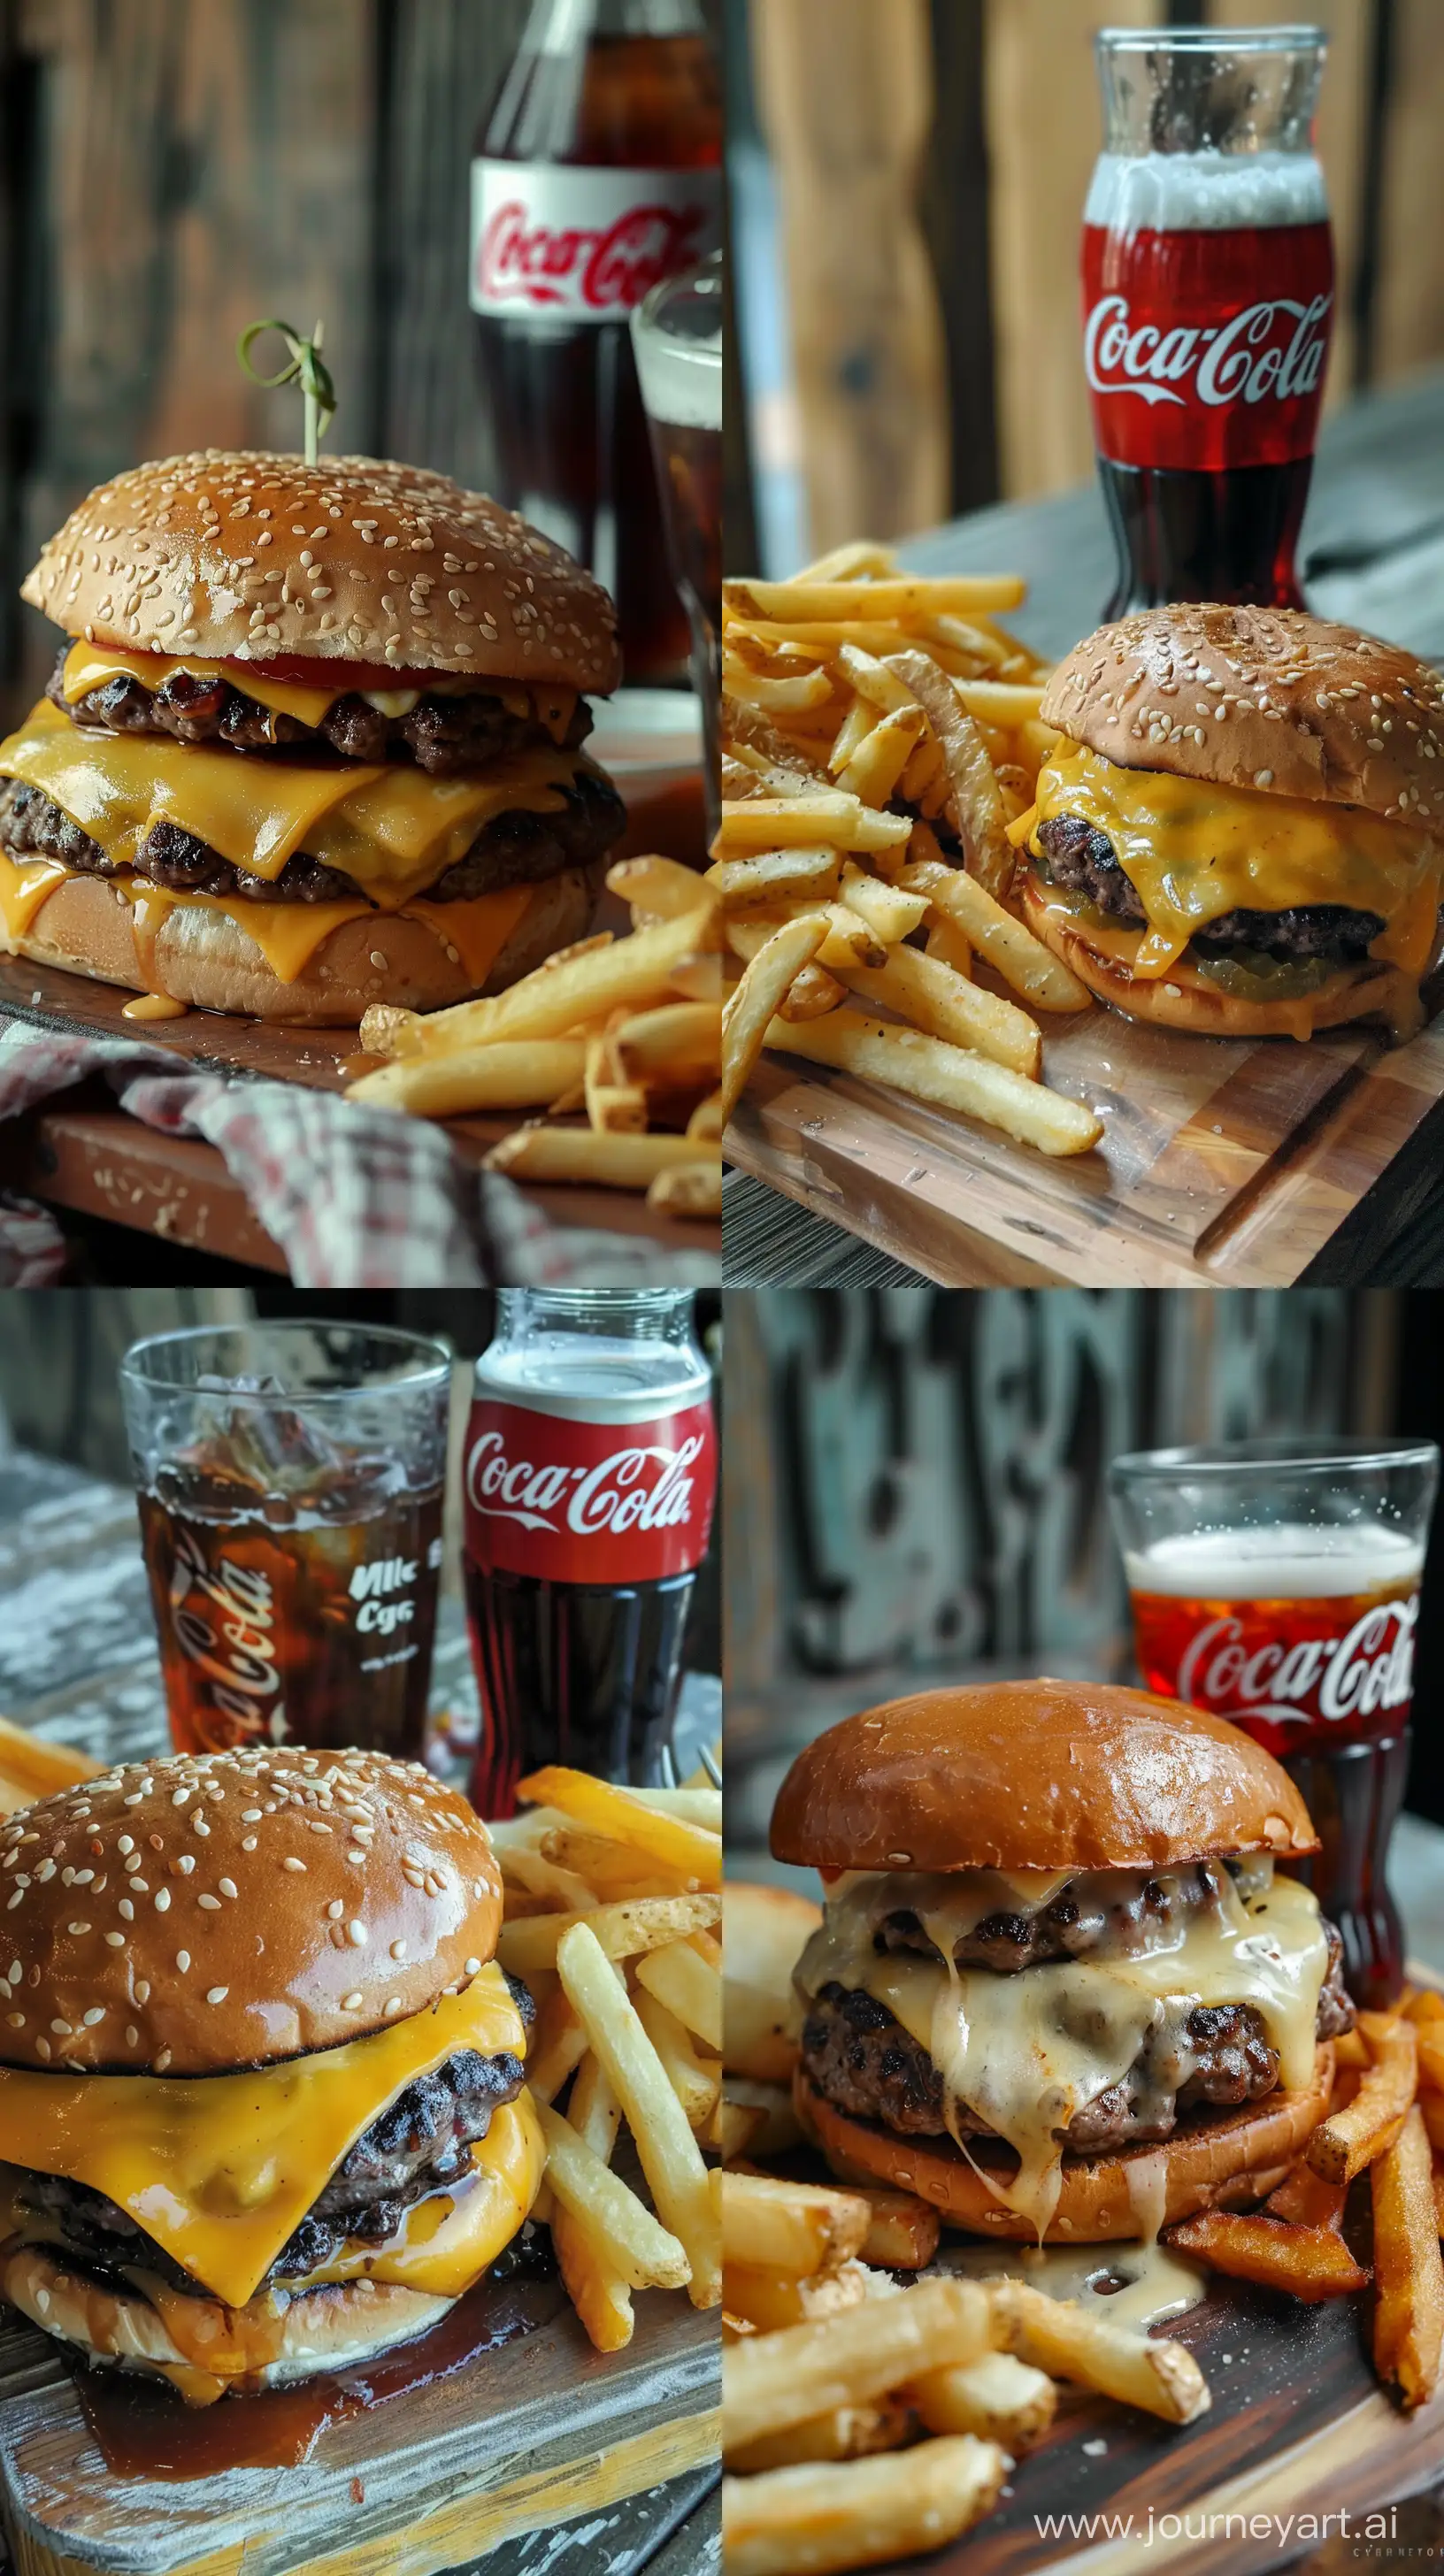 Delicious-Cheeseburger-with-Fries-and-CocaCola-Tempting-Fast-Food-Snapshot